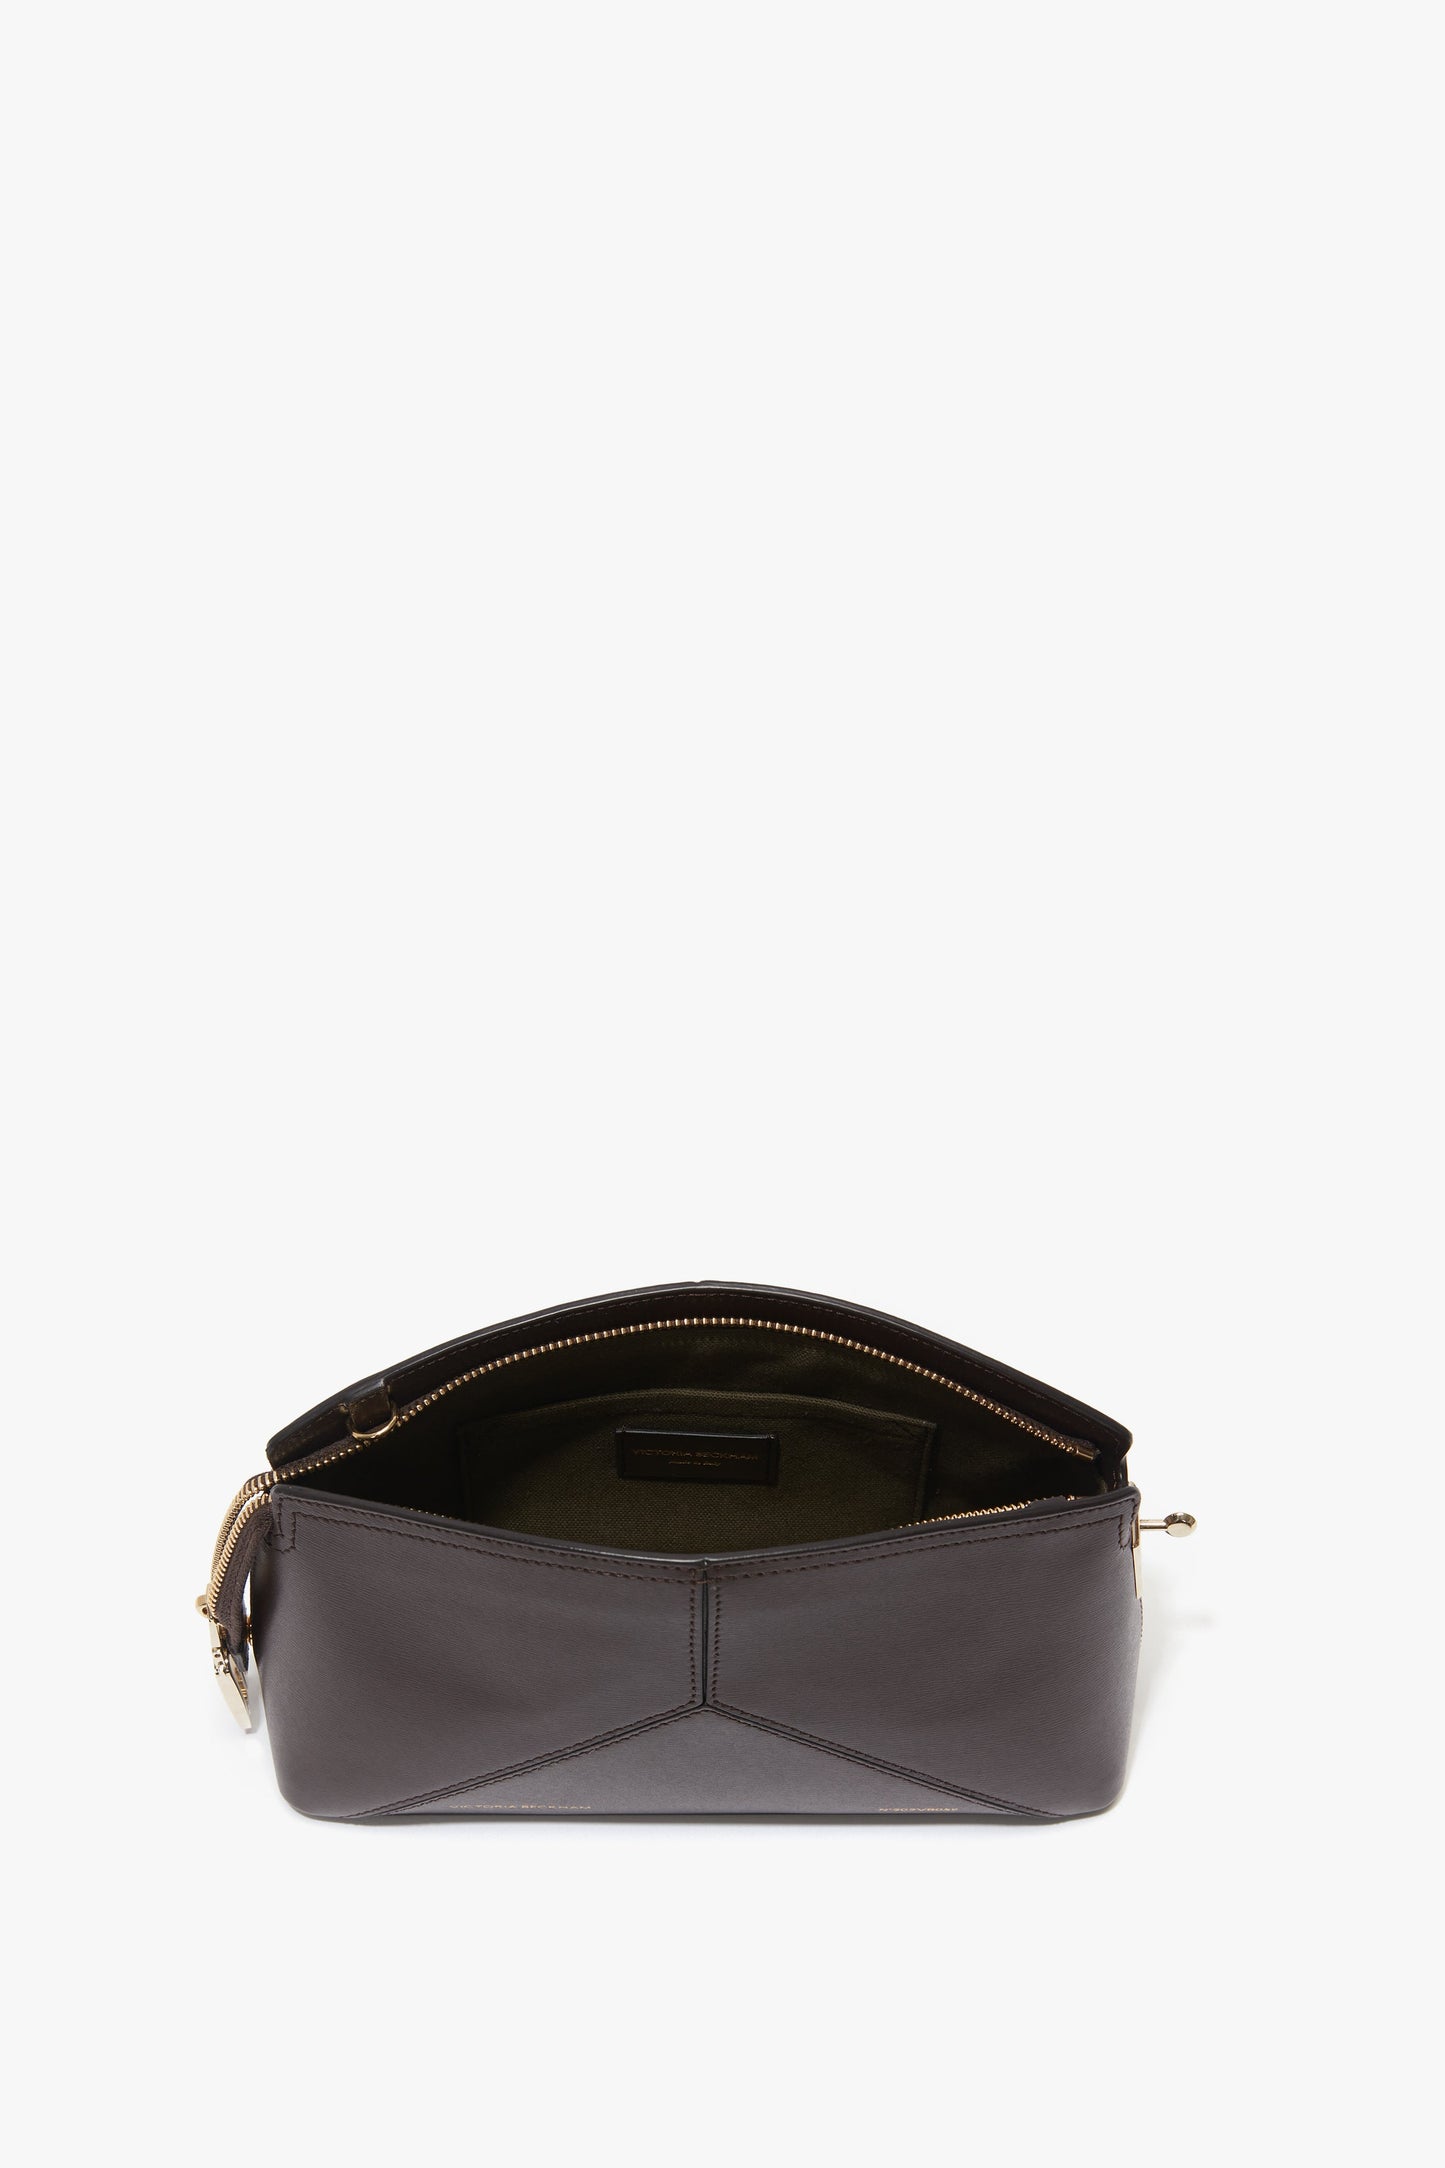 An open, dark brown Exclusive Victoria Crossbody Bag In Brown Leather by Victoria Beckham with a zippered main compartment, displaying interior pocket and lining, adorned with the signature V shape.